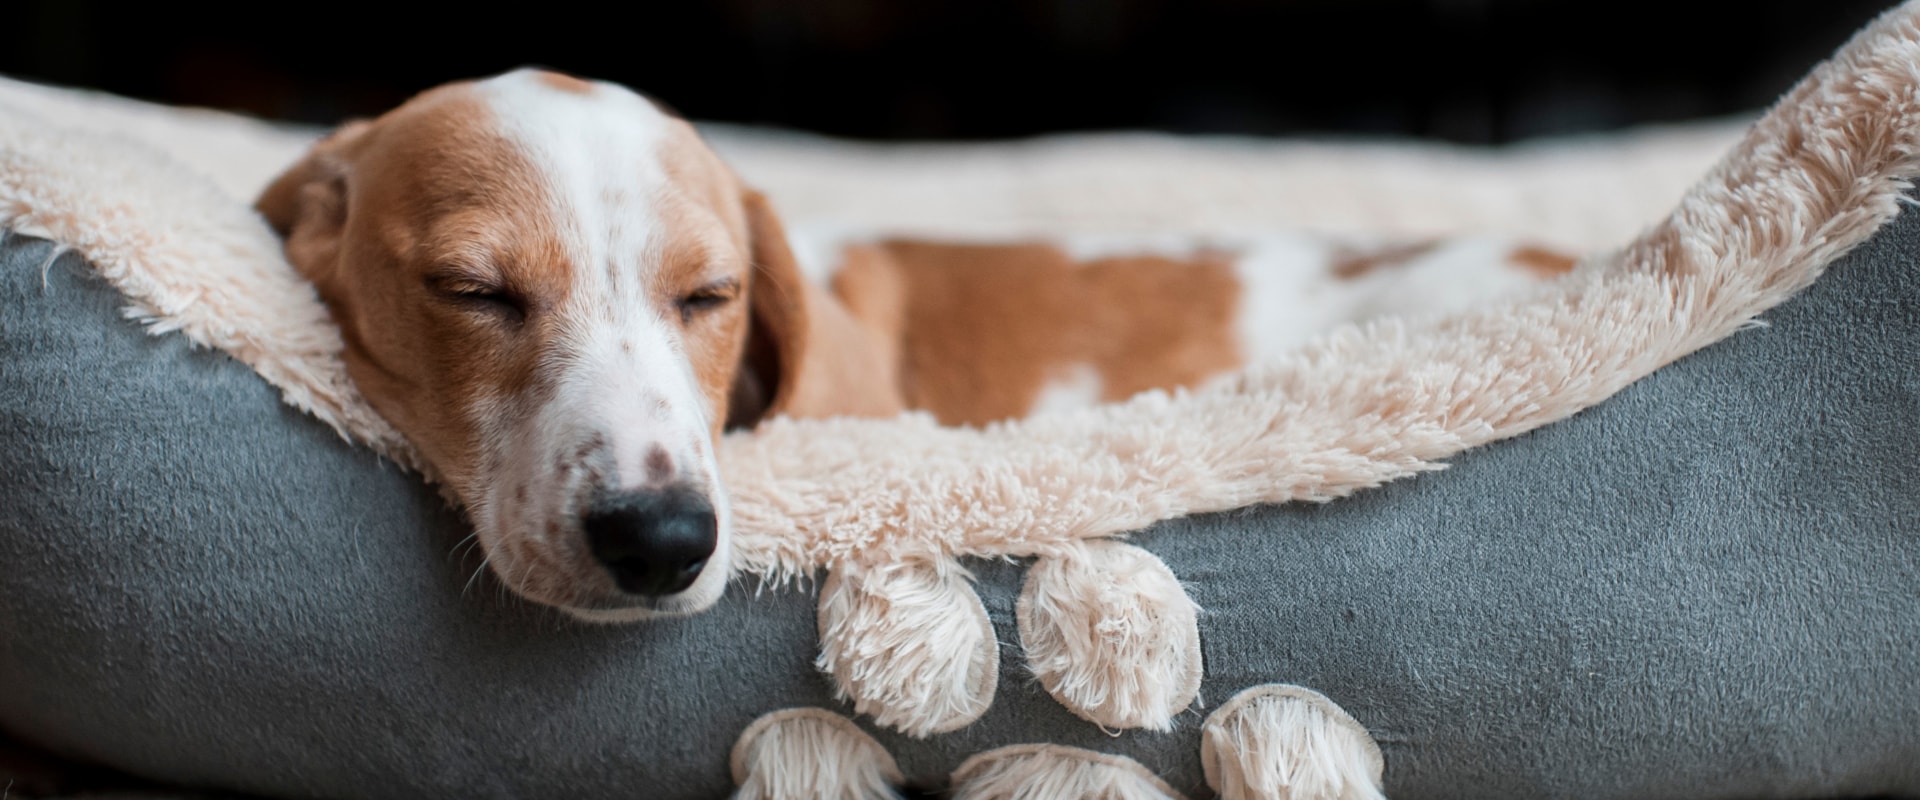 Alternatives to Orthopedic Pet Beds for Pets with Joint Pain